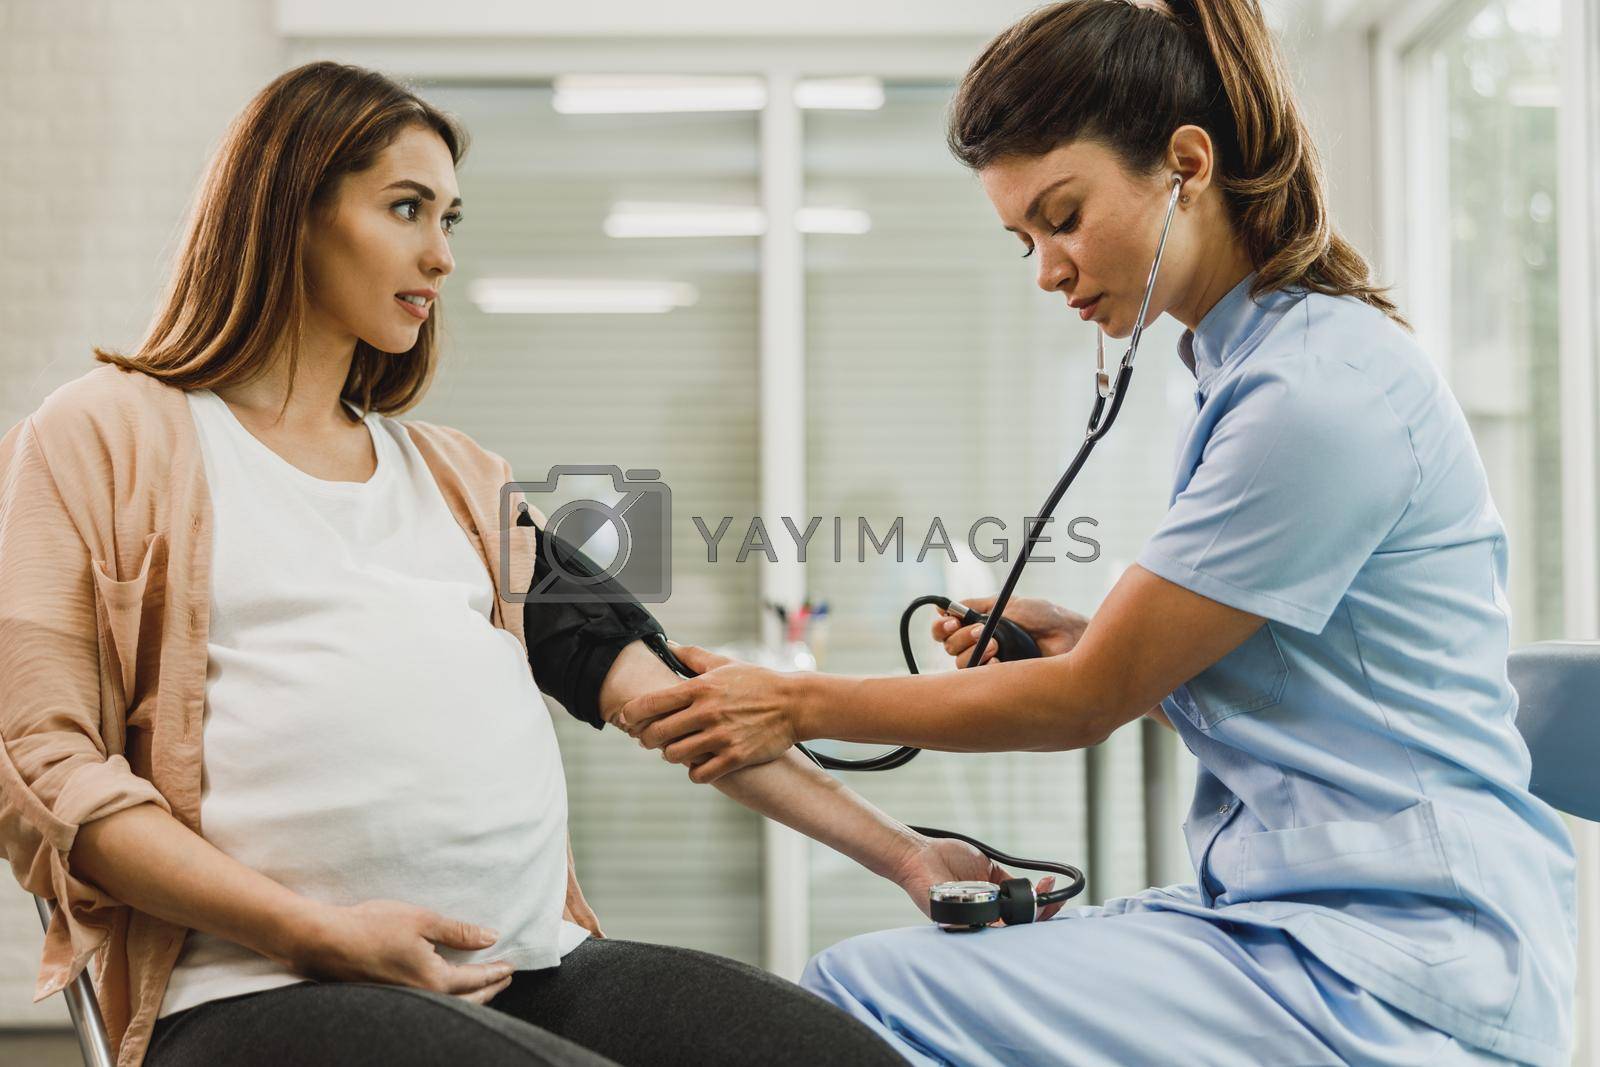 Royalty free image of Gynecology Nurse Checking The Blood Pressure Of Pregnant Woman by MilanMarkovic78